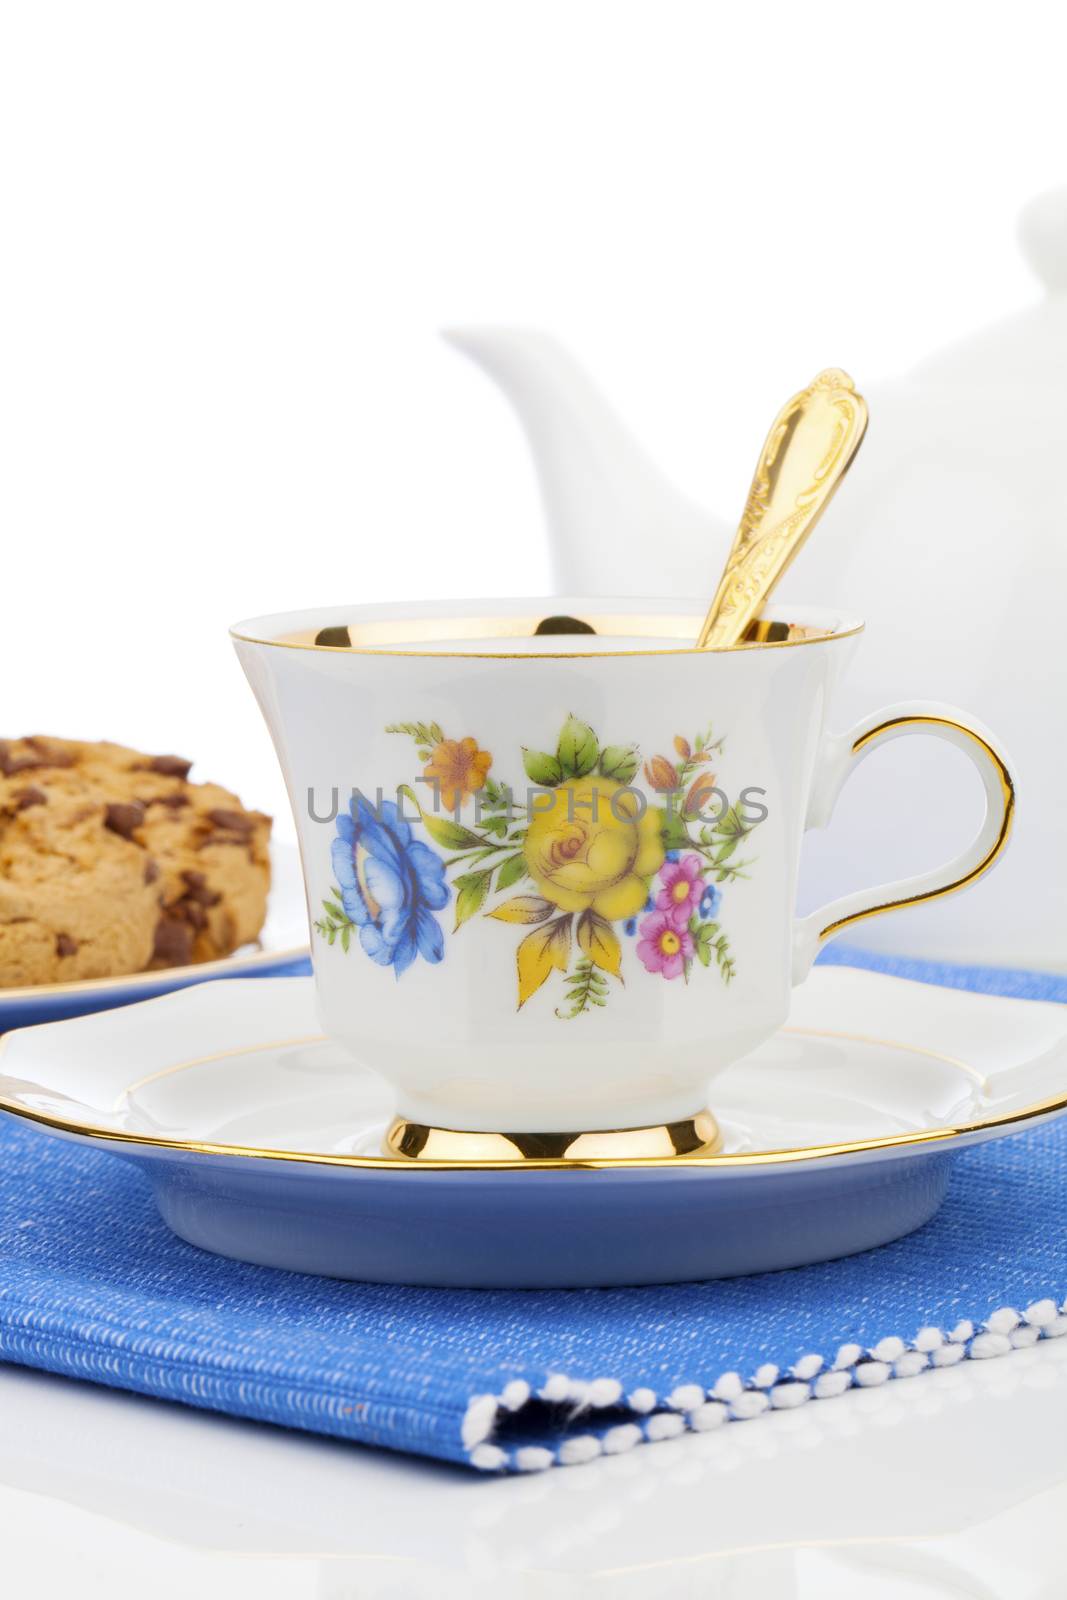 cup of tea on white background by motorolka